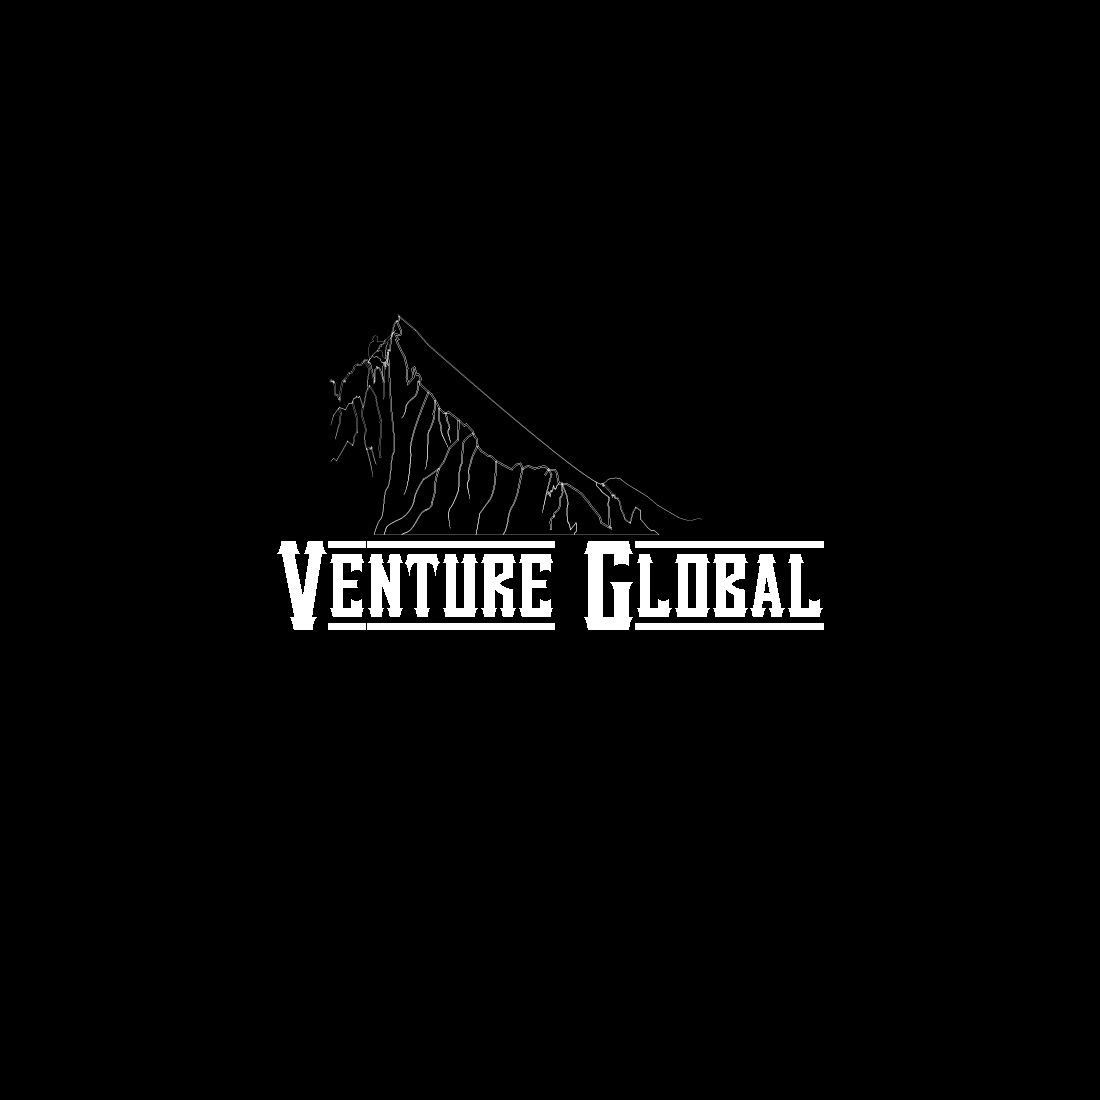 Venture Global preview image.